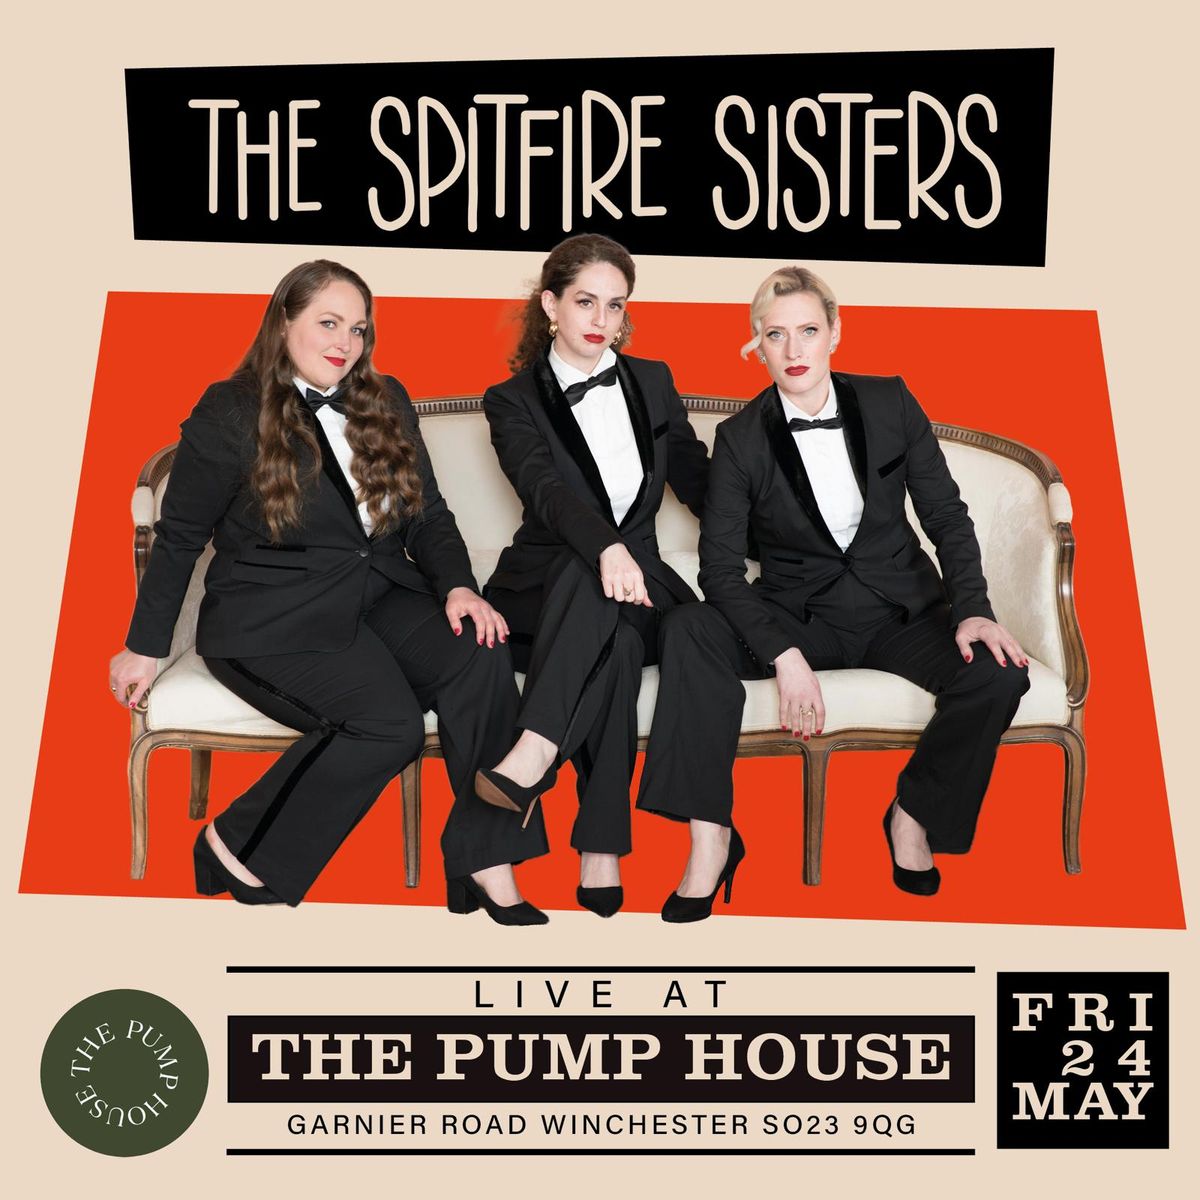 The Spitfire Sisters - Live at The Pump House!